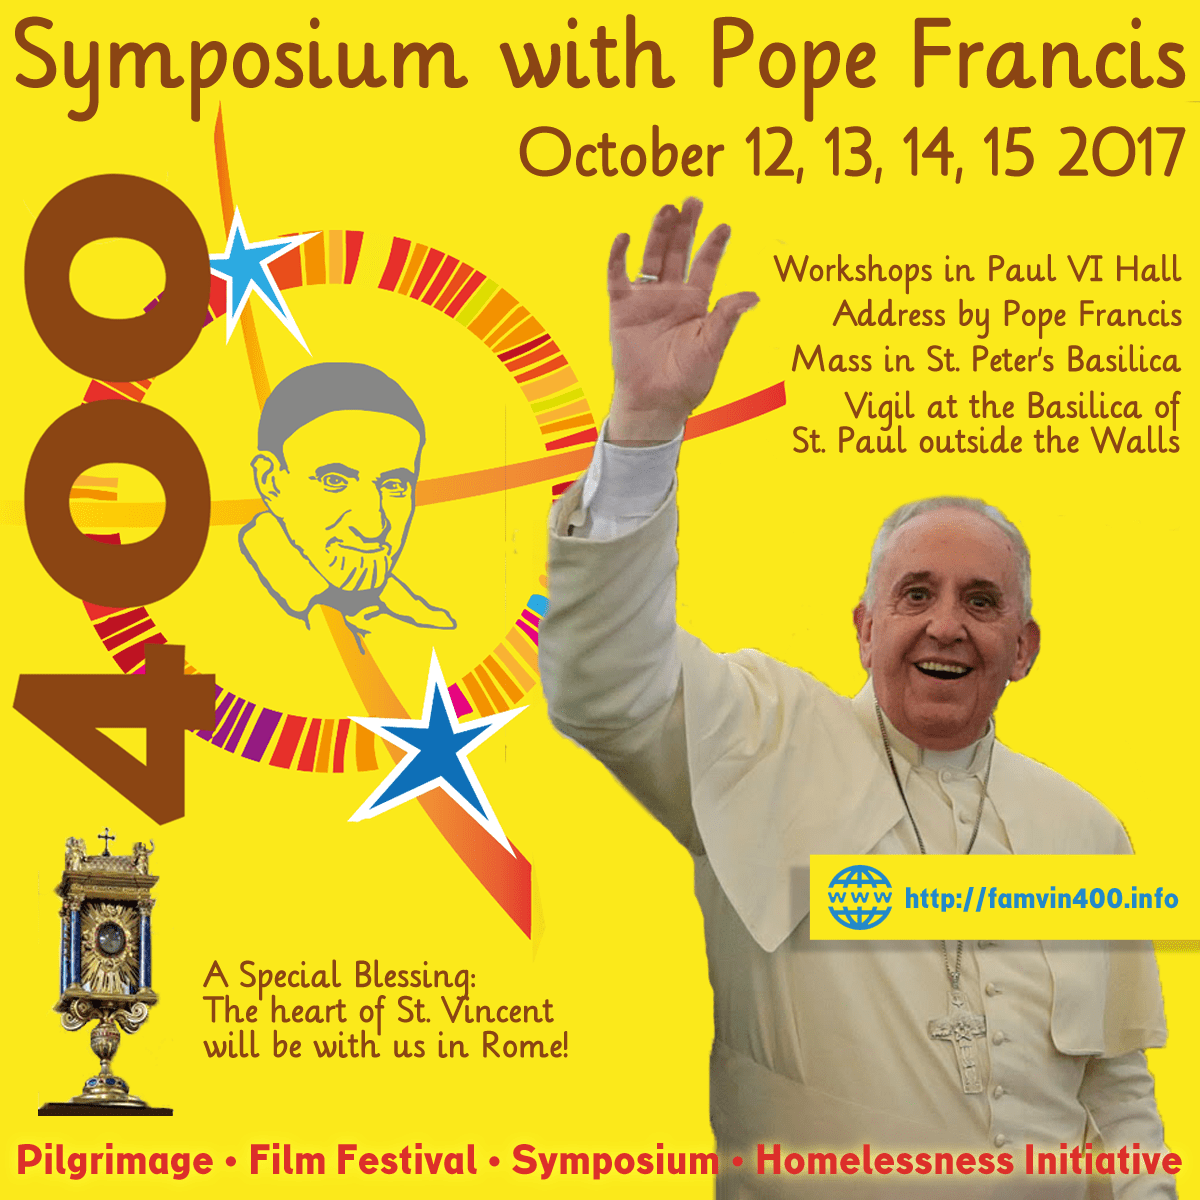 Symposium with Pope Francis